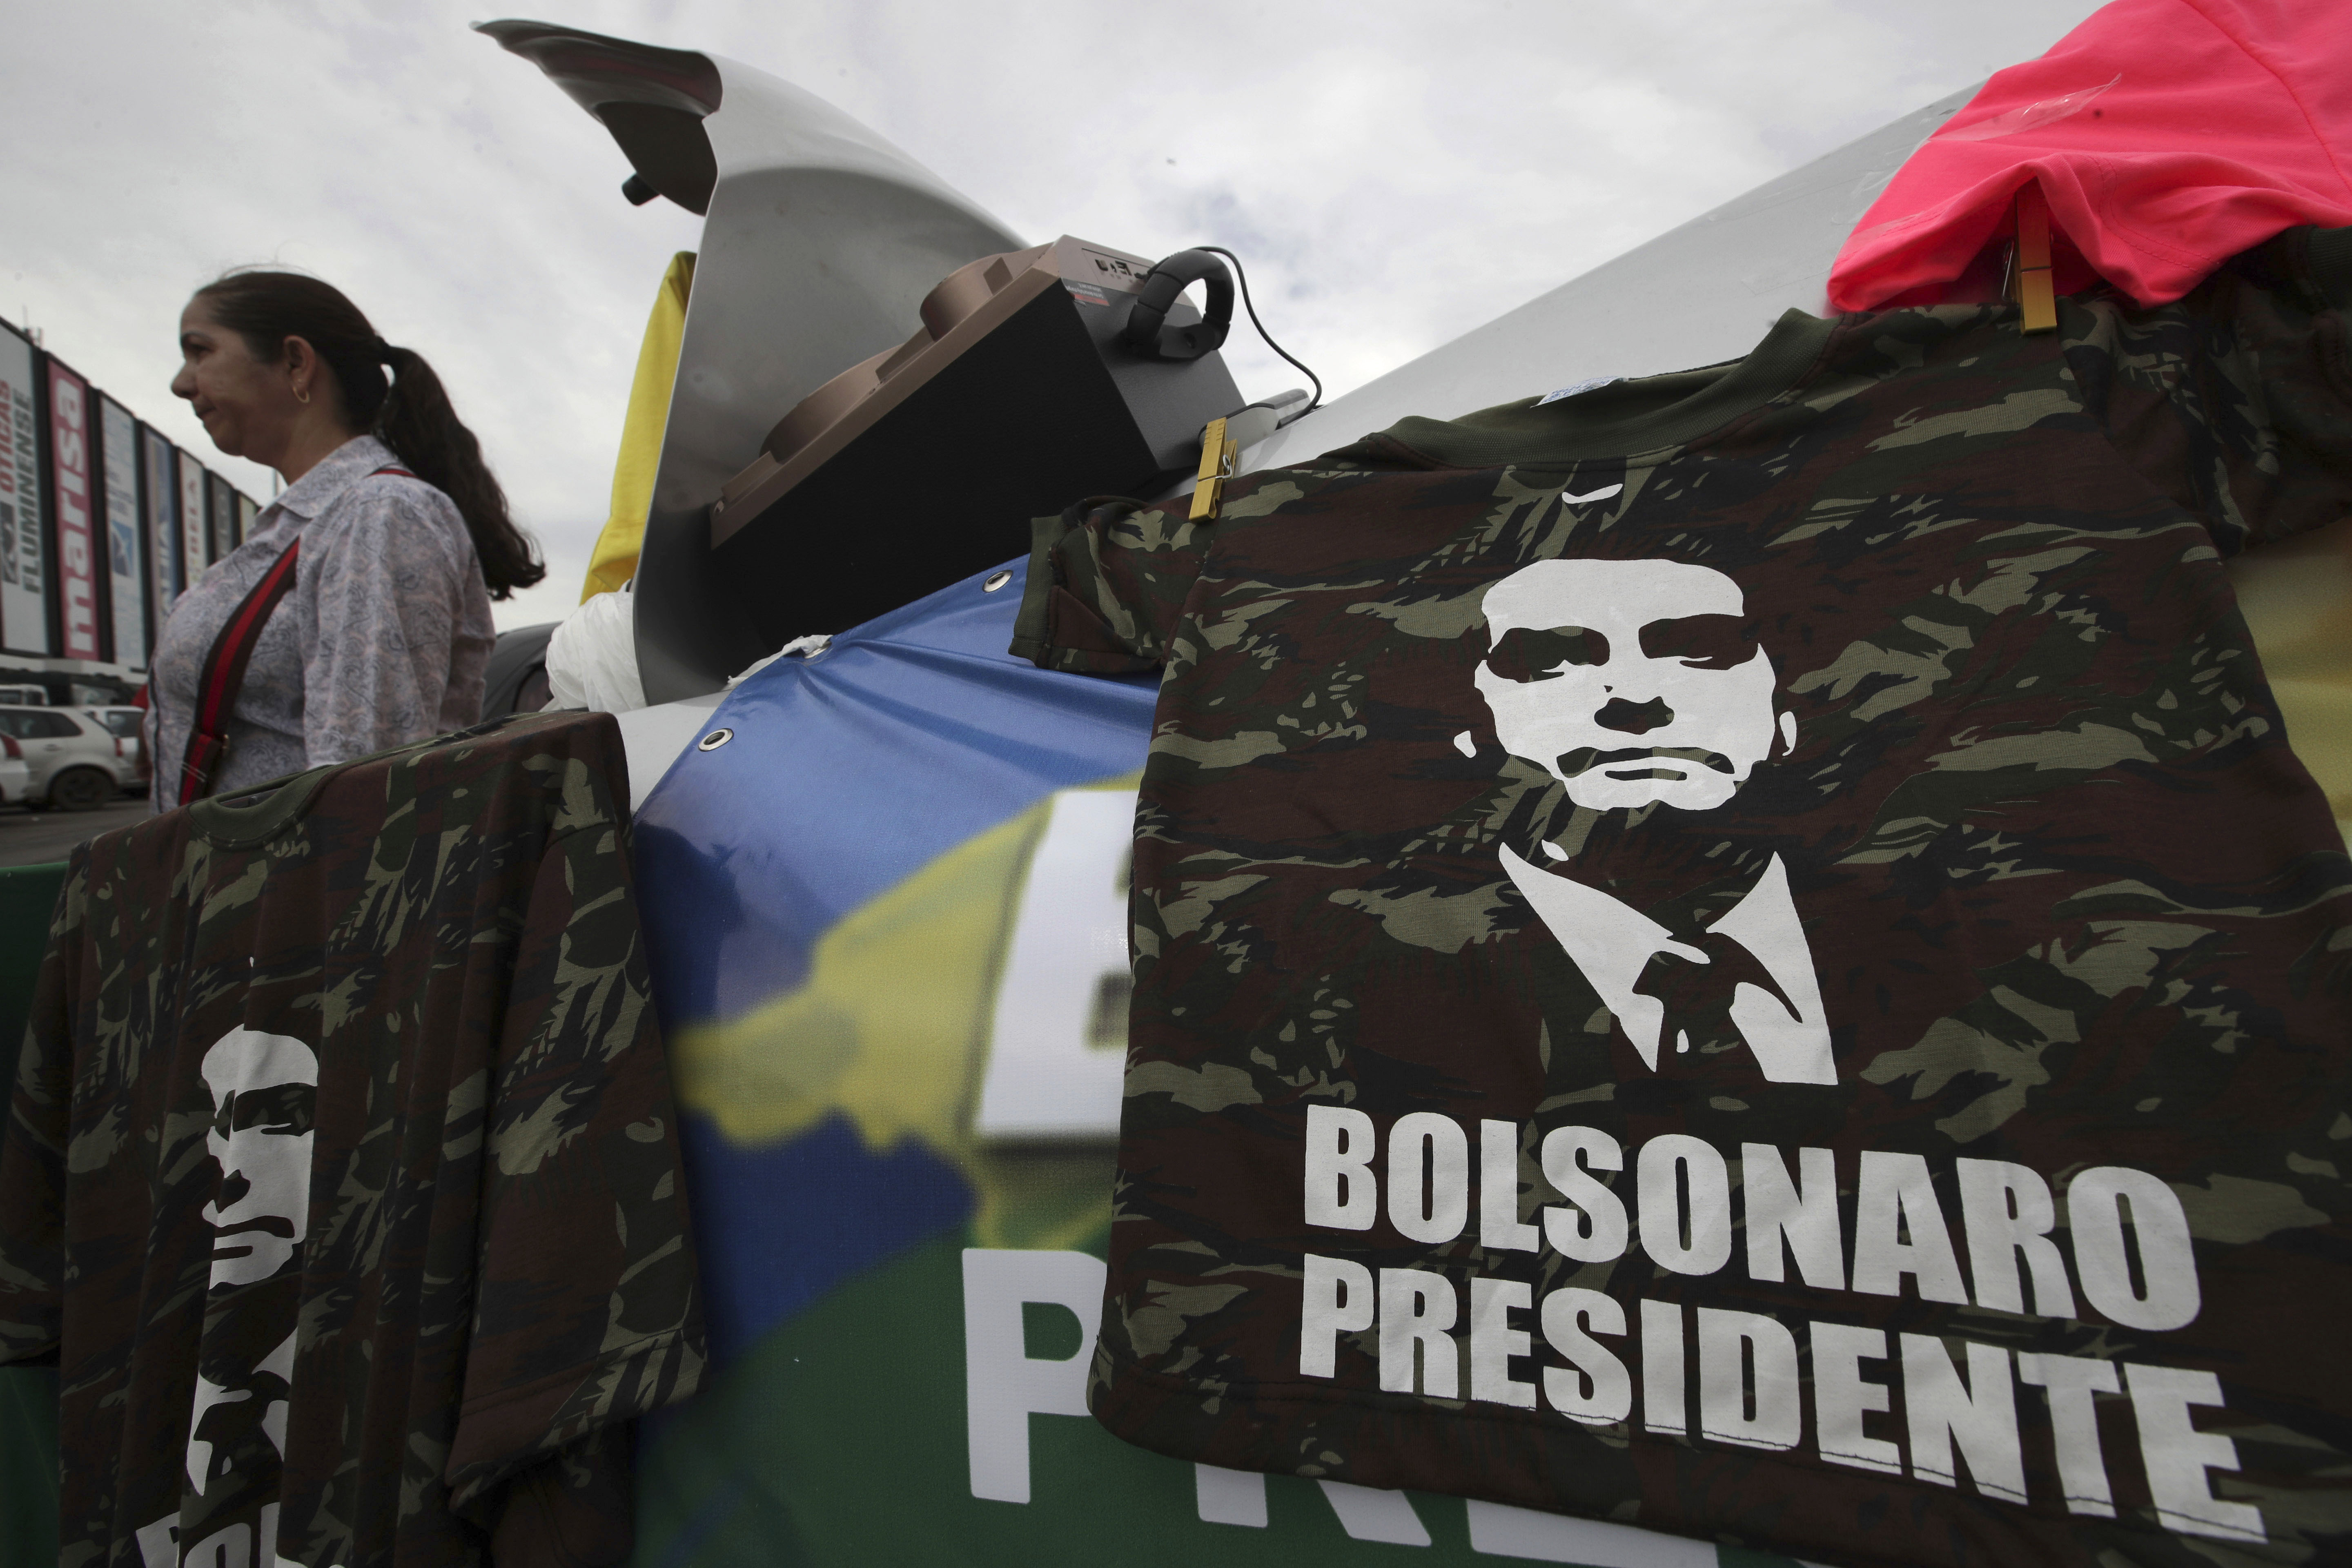 A supporter sells T-shirts with an image of right-wing presidential candidate Jair Bolsonaro, at a bus station in Brasília, Brazil, Wednesday, Oct. 17, 2018. Before the run-off election in Brazil on 28 October, right-wing populist presidential candidate Bolsonaro has a clear advantage over left-wing Workers' Party presidential candidate Fernando Haddad. (AP Photo/Eraldo Peres)